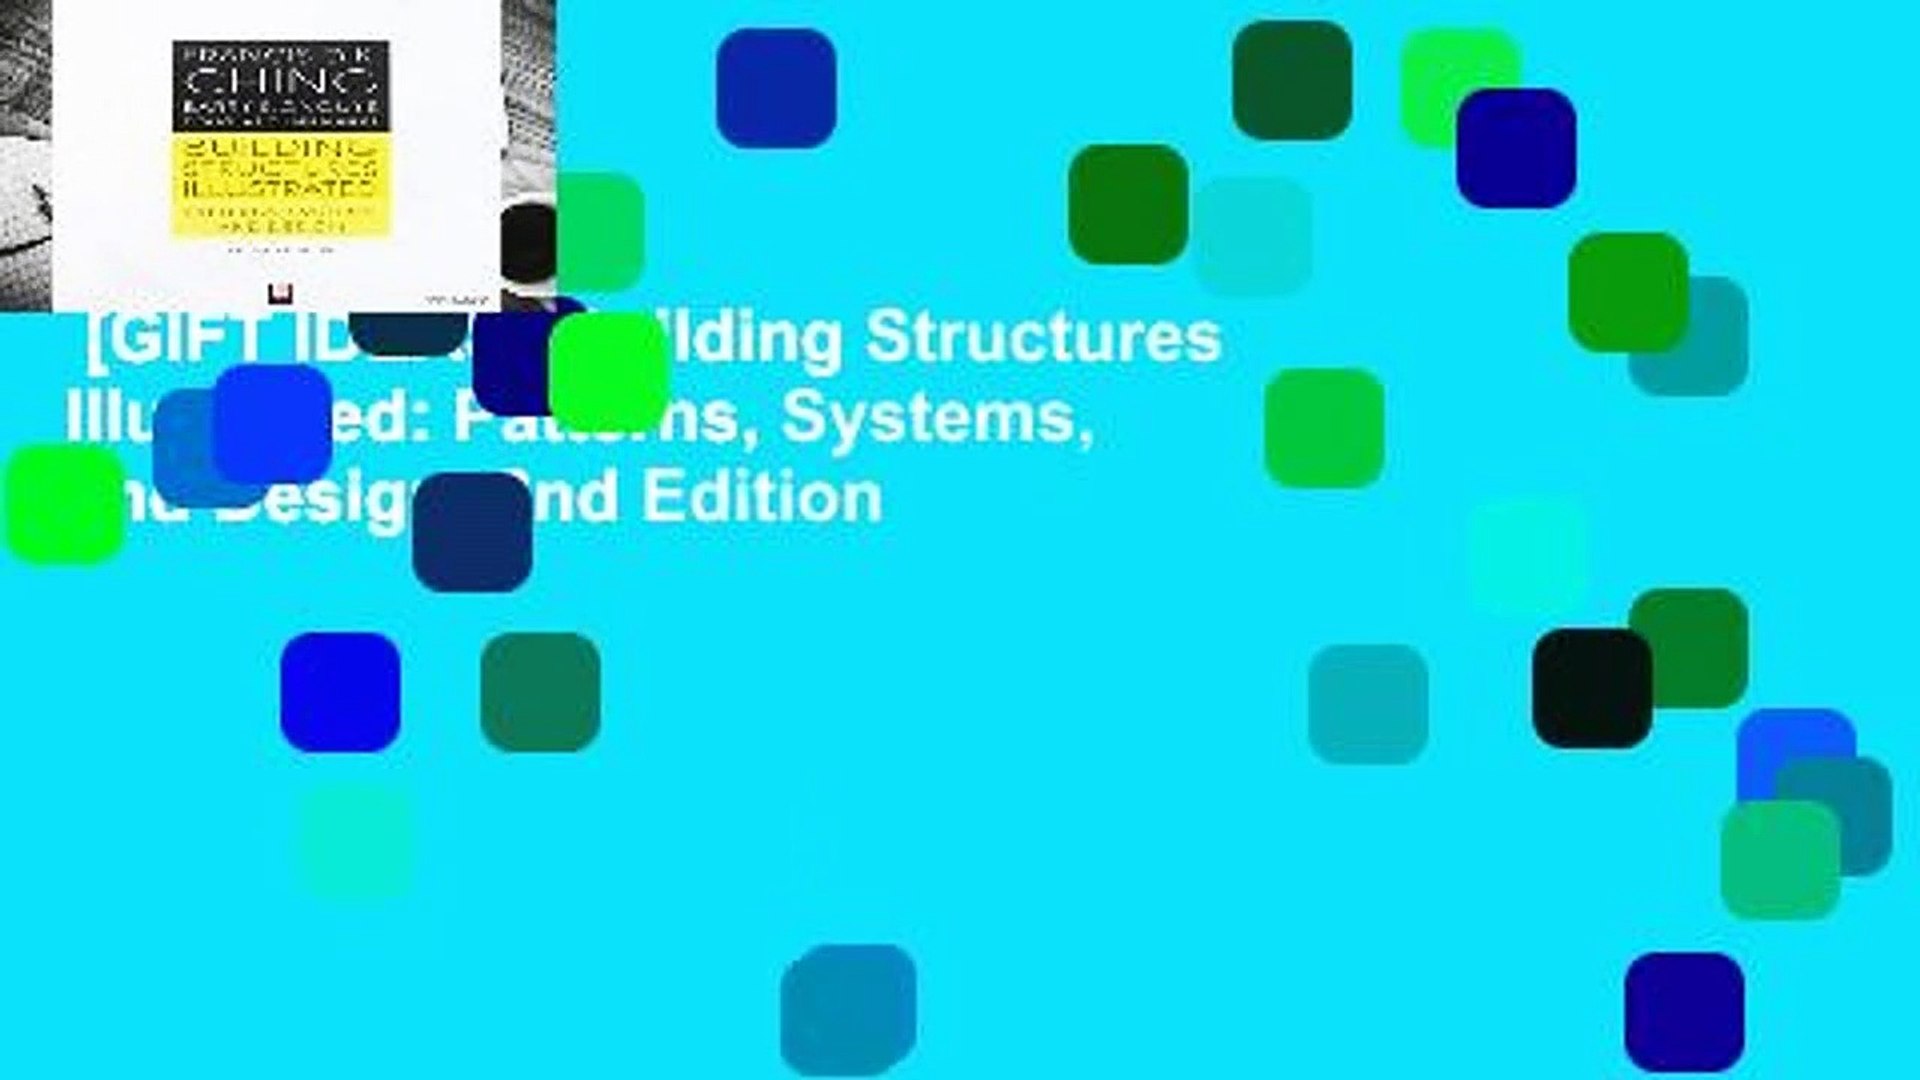 [GIFT IDEAS] Building Structures Illustrated: Patterns, Systems, and Design, 2nd Edition